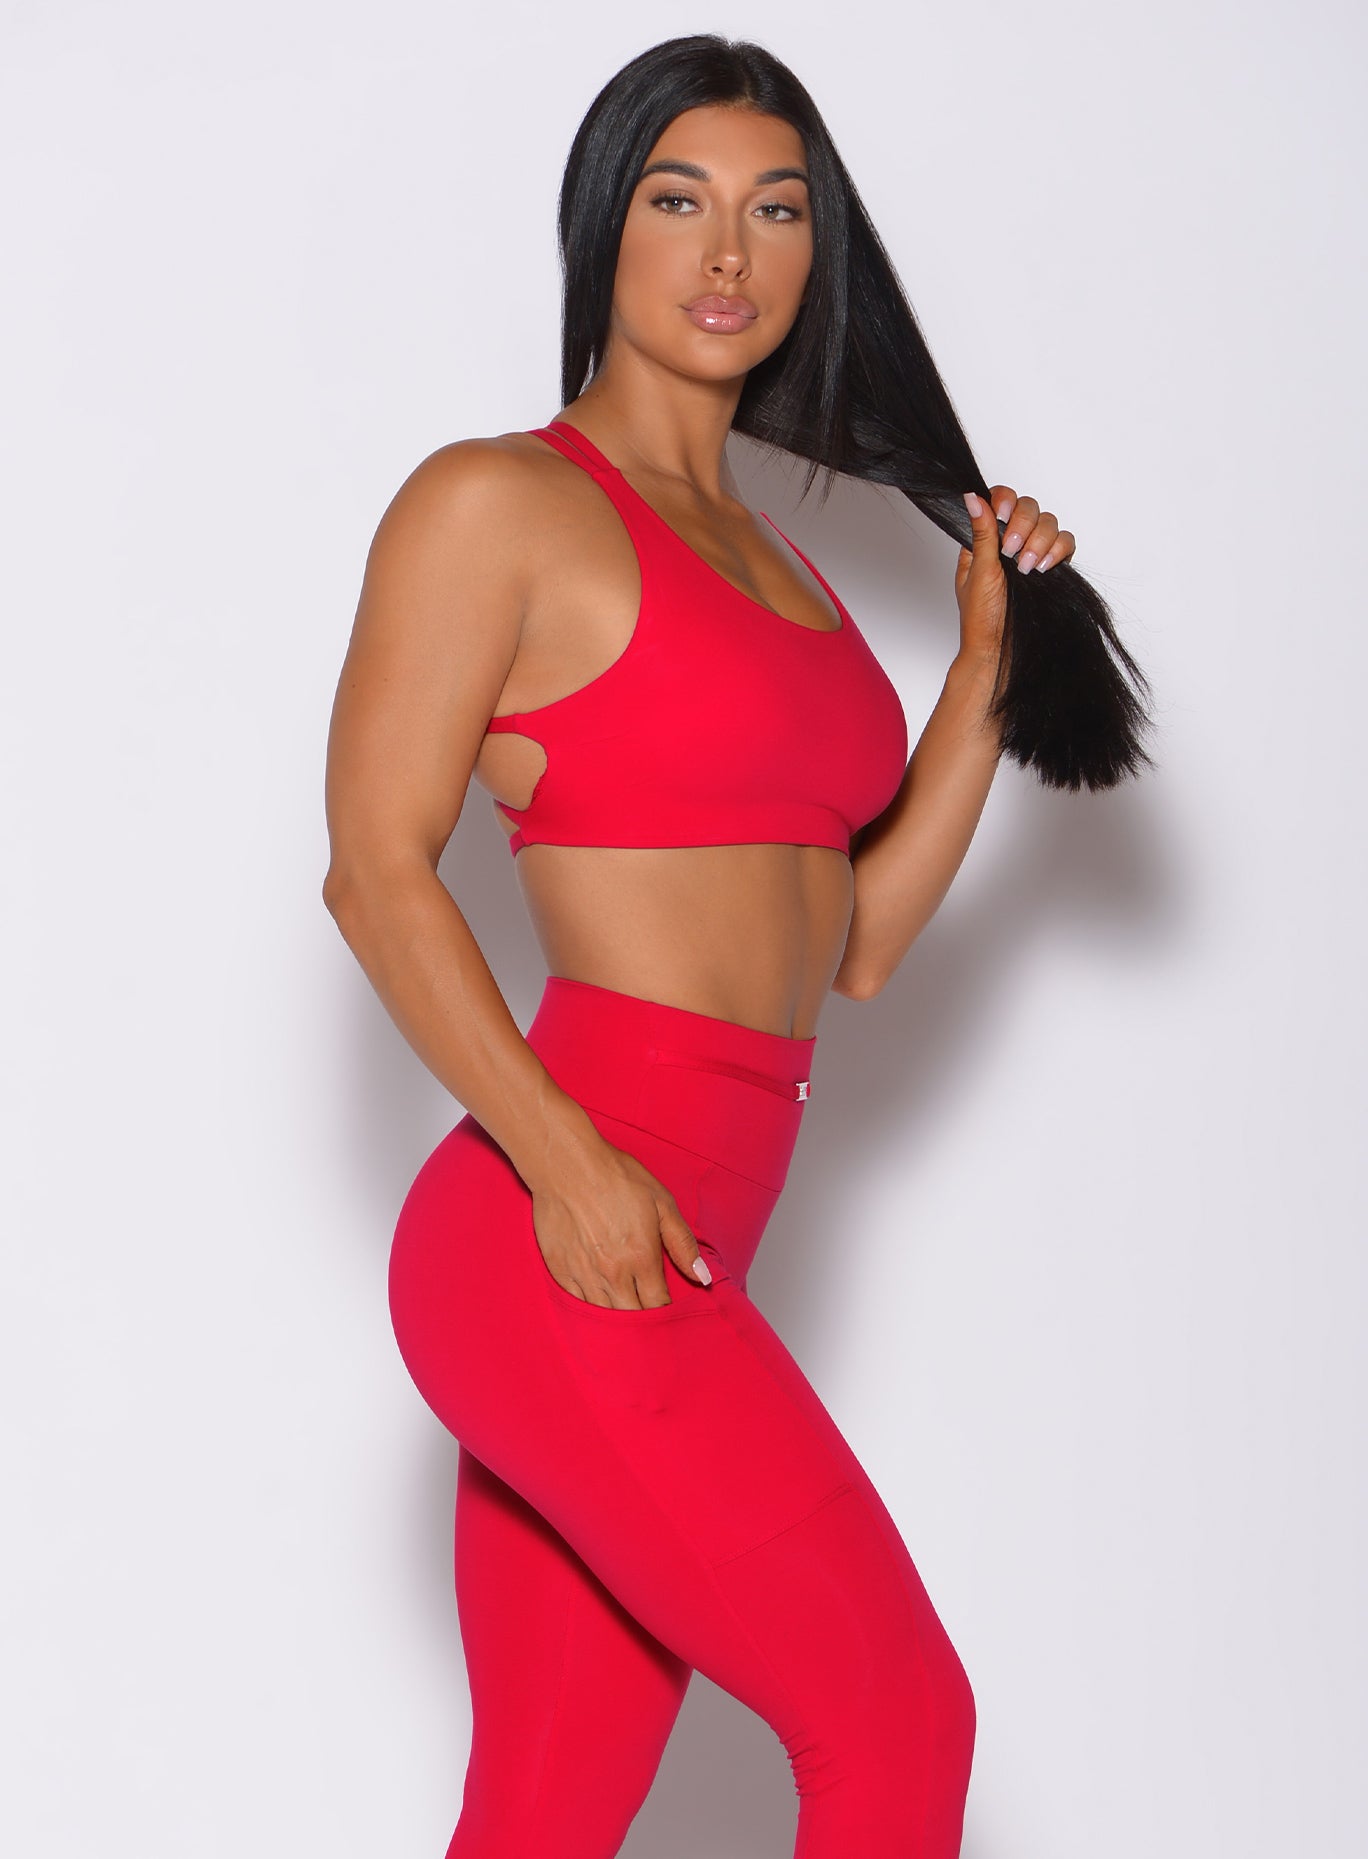 Right side profile view of a model angled right and holding her hair wearing our red barbell sports bra and a matching leggings